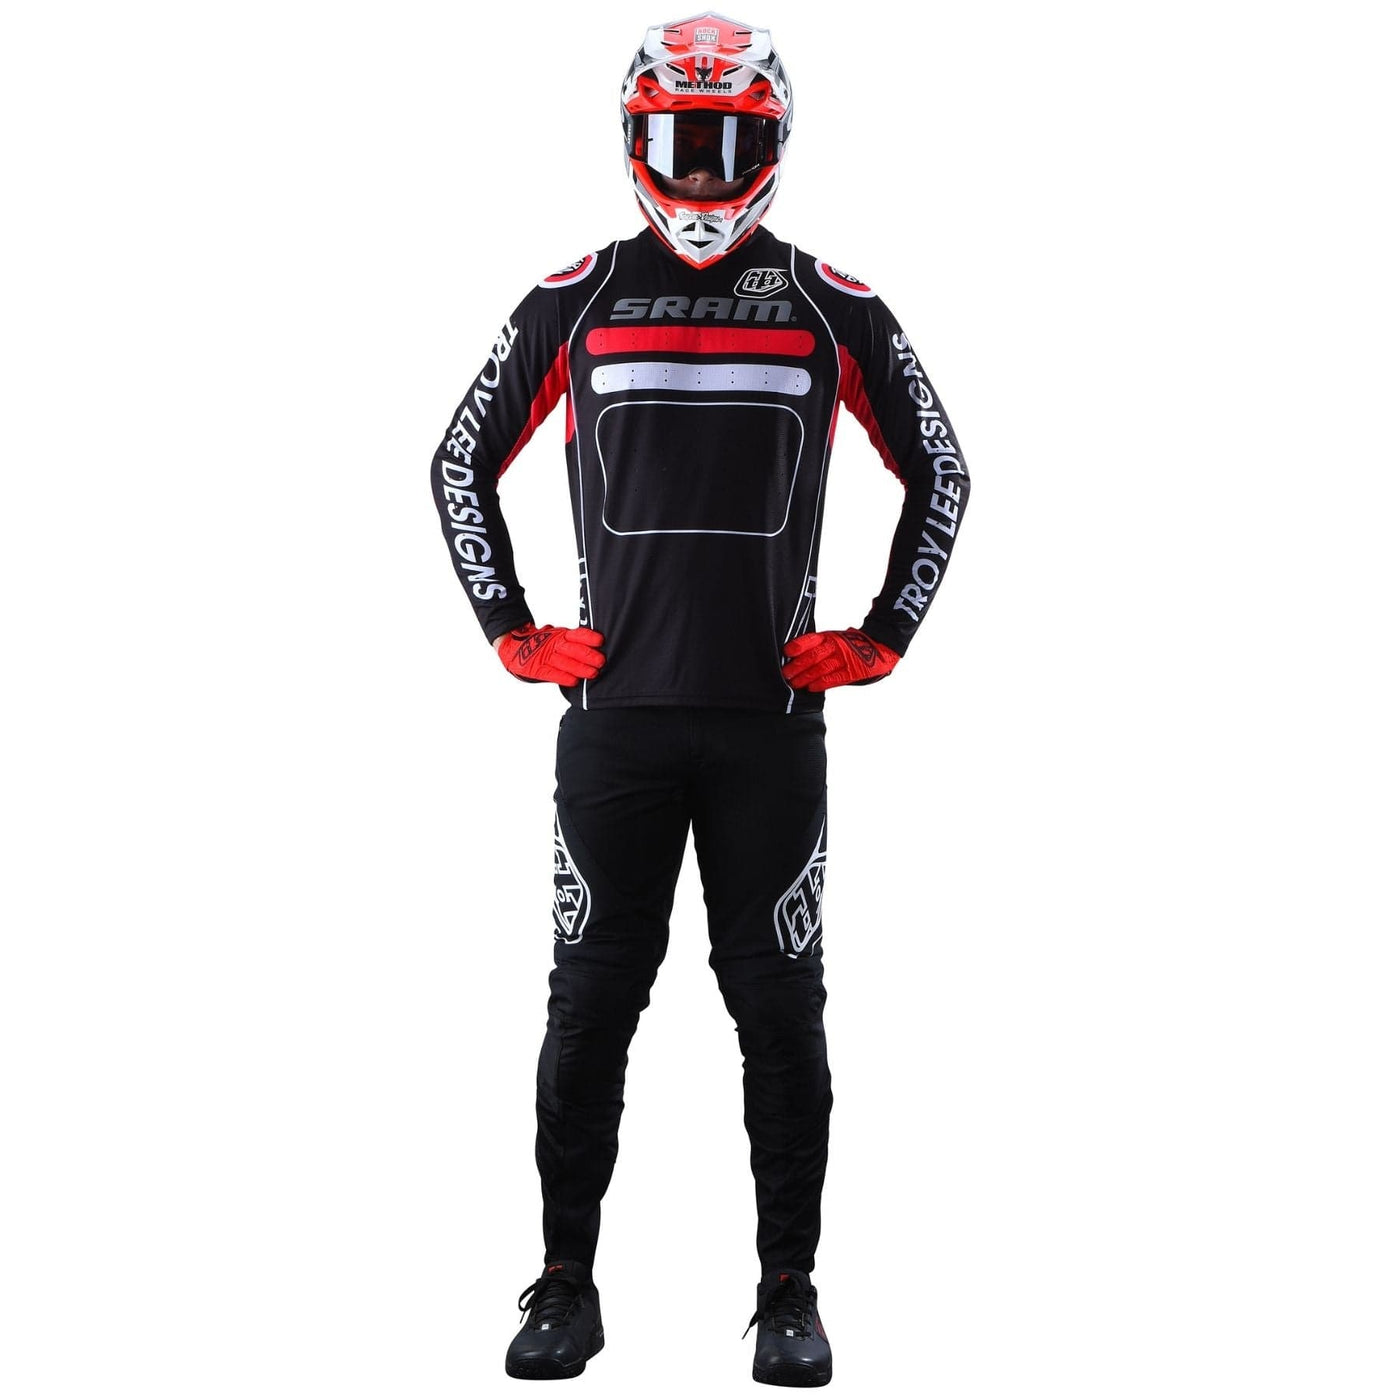 Troy Lee Designs Sprint Jersey Drop In - Sram Black 8Lines Shop - Fast Shipping